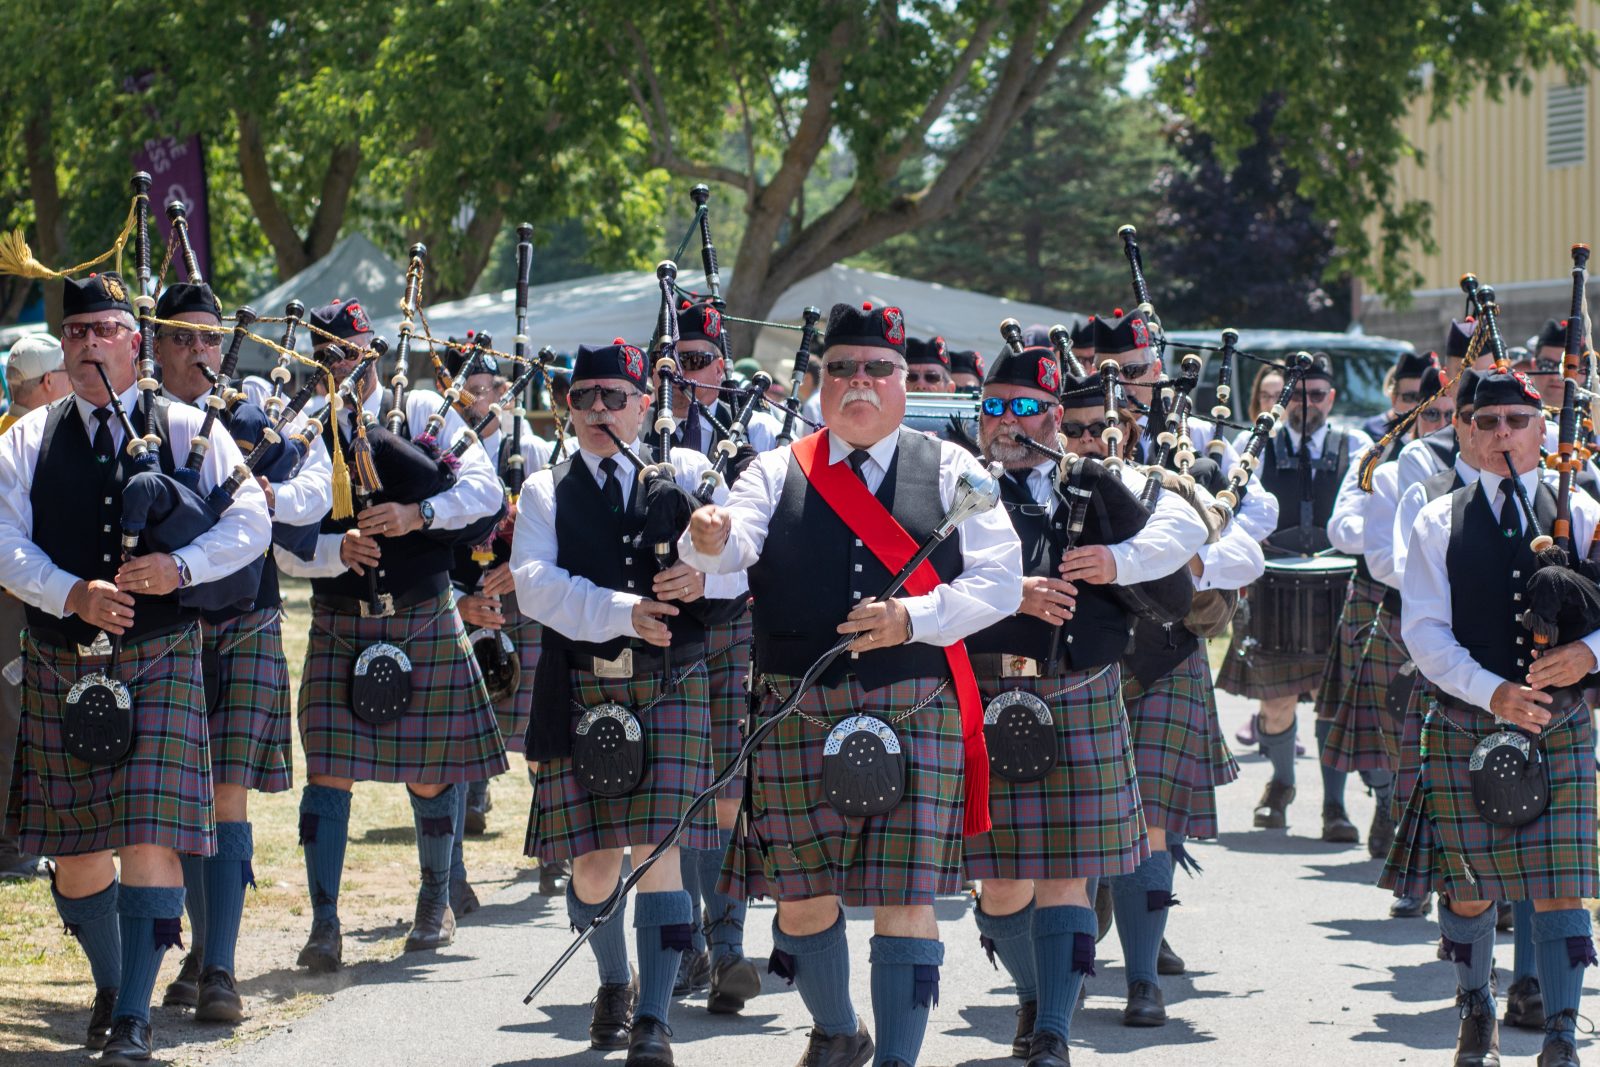 Highland Games weighs options